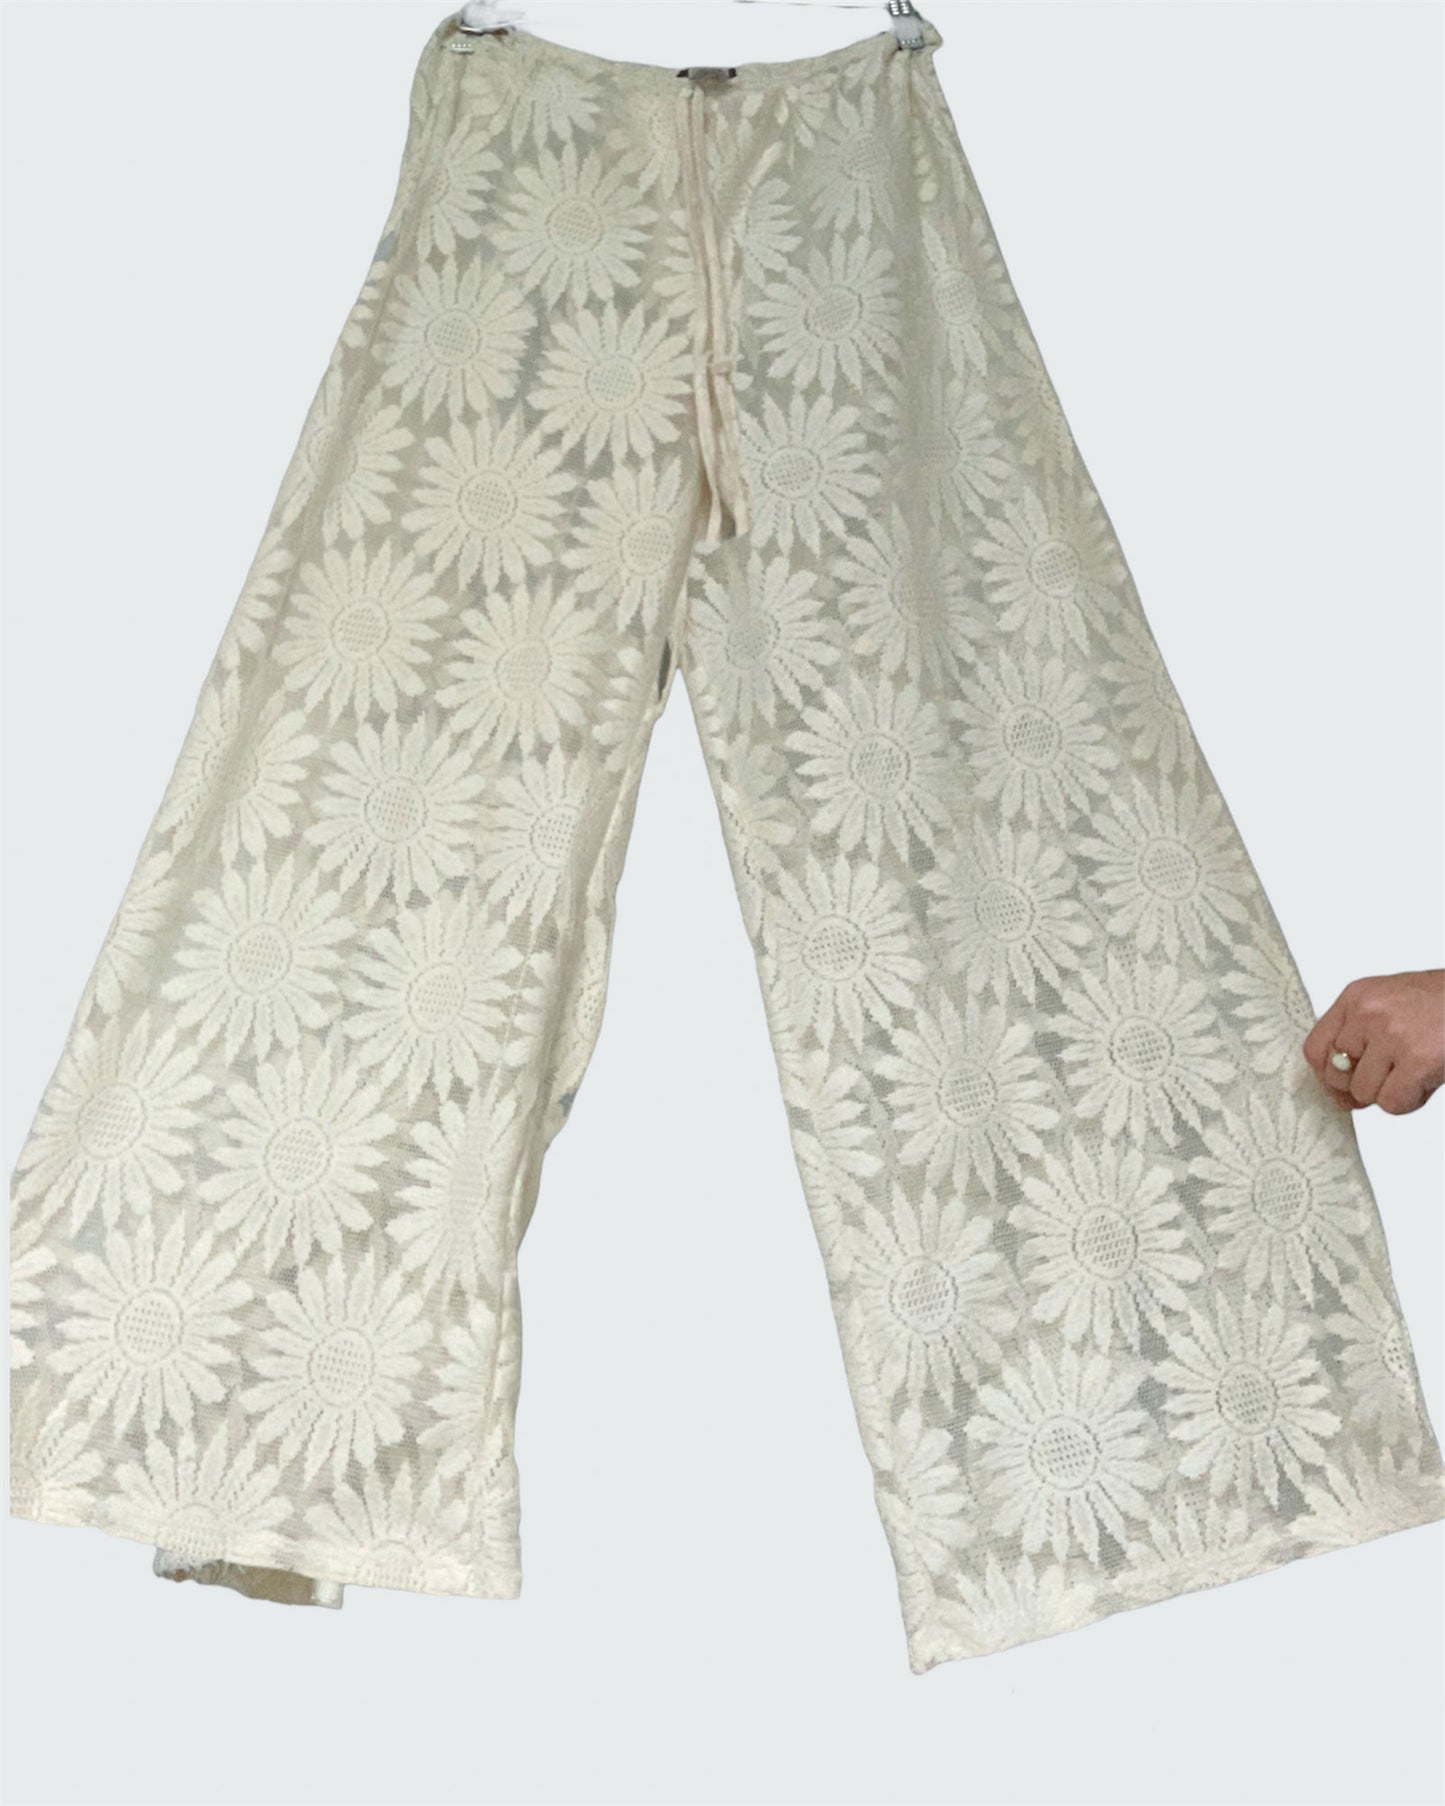 Vintage Lace Daisy Flares